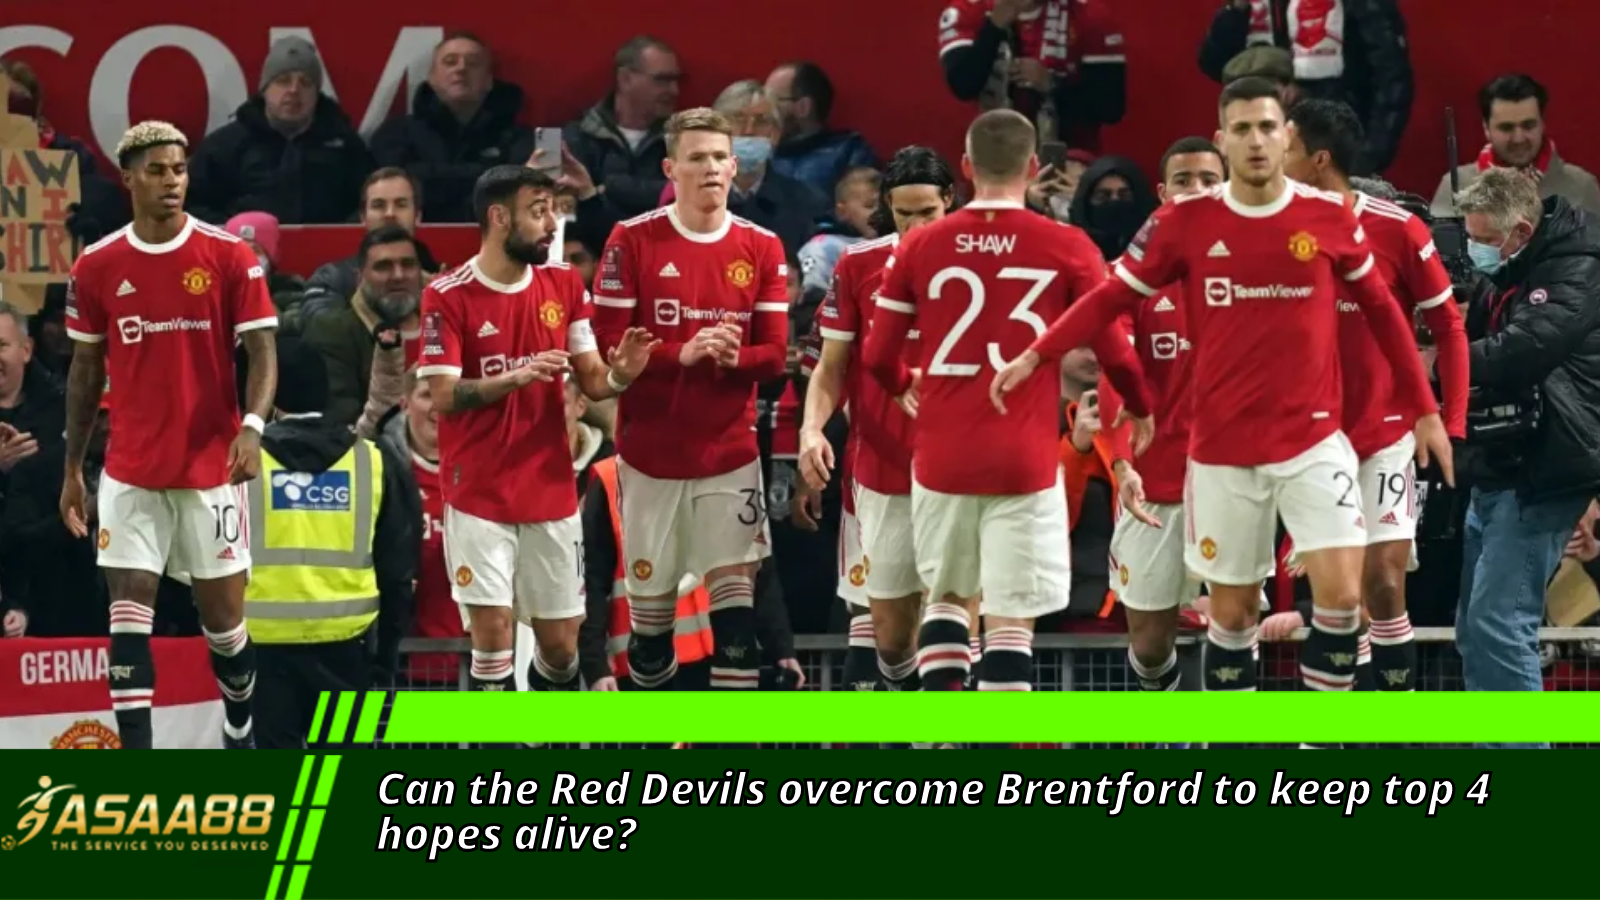 Can the Red Devils overcome Brentford to keep top 4 hopes alive?